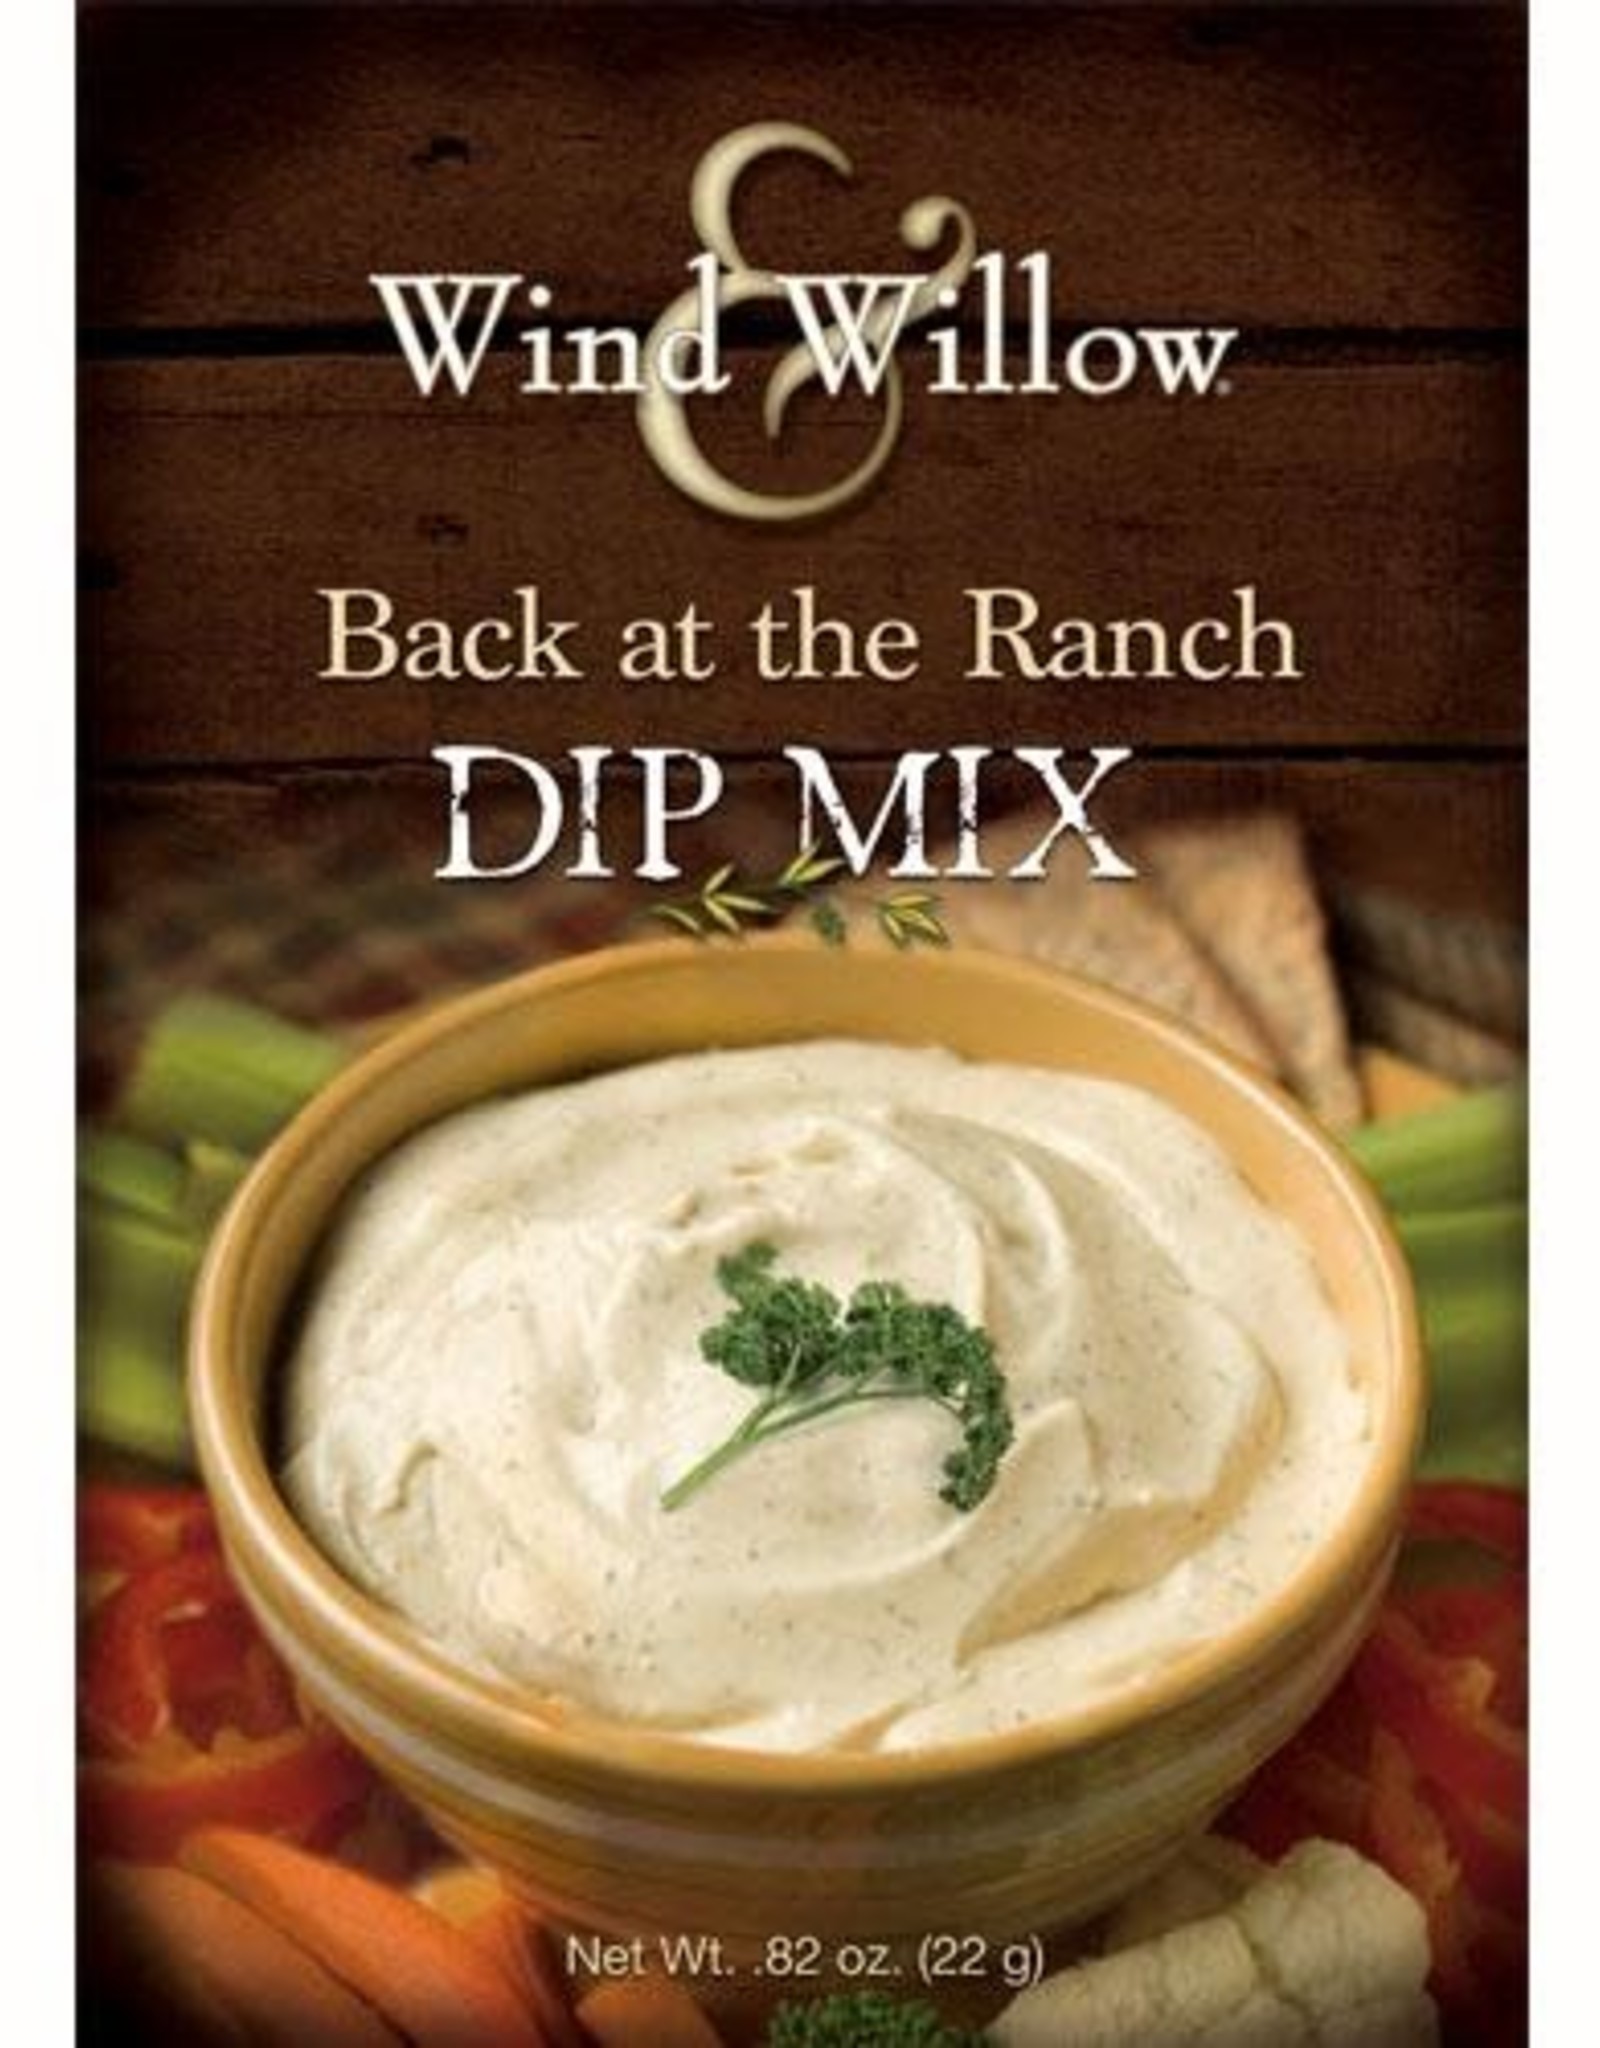 Wind and Willow DIP MIX